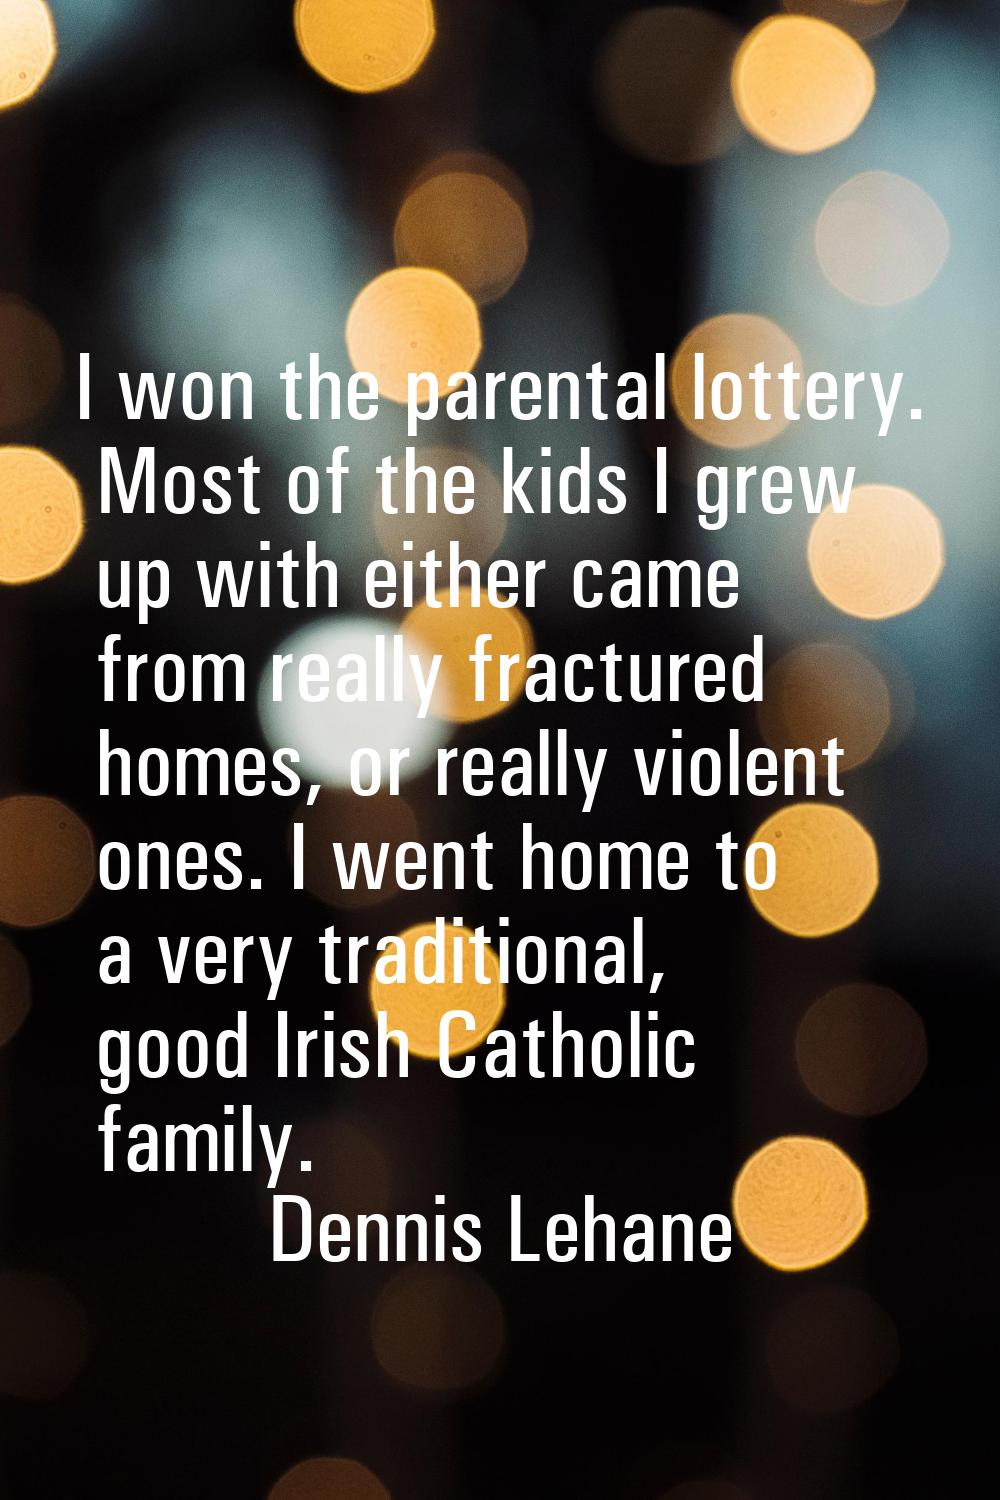 I won the parental lottery. Most of the kids I grew up with either came from really fractured homes